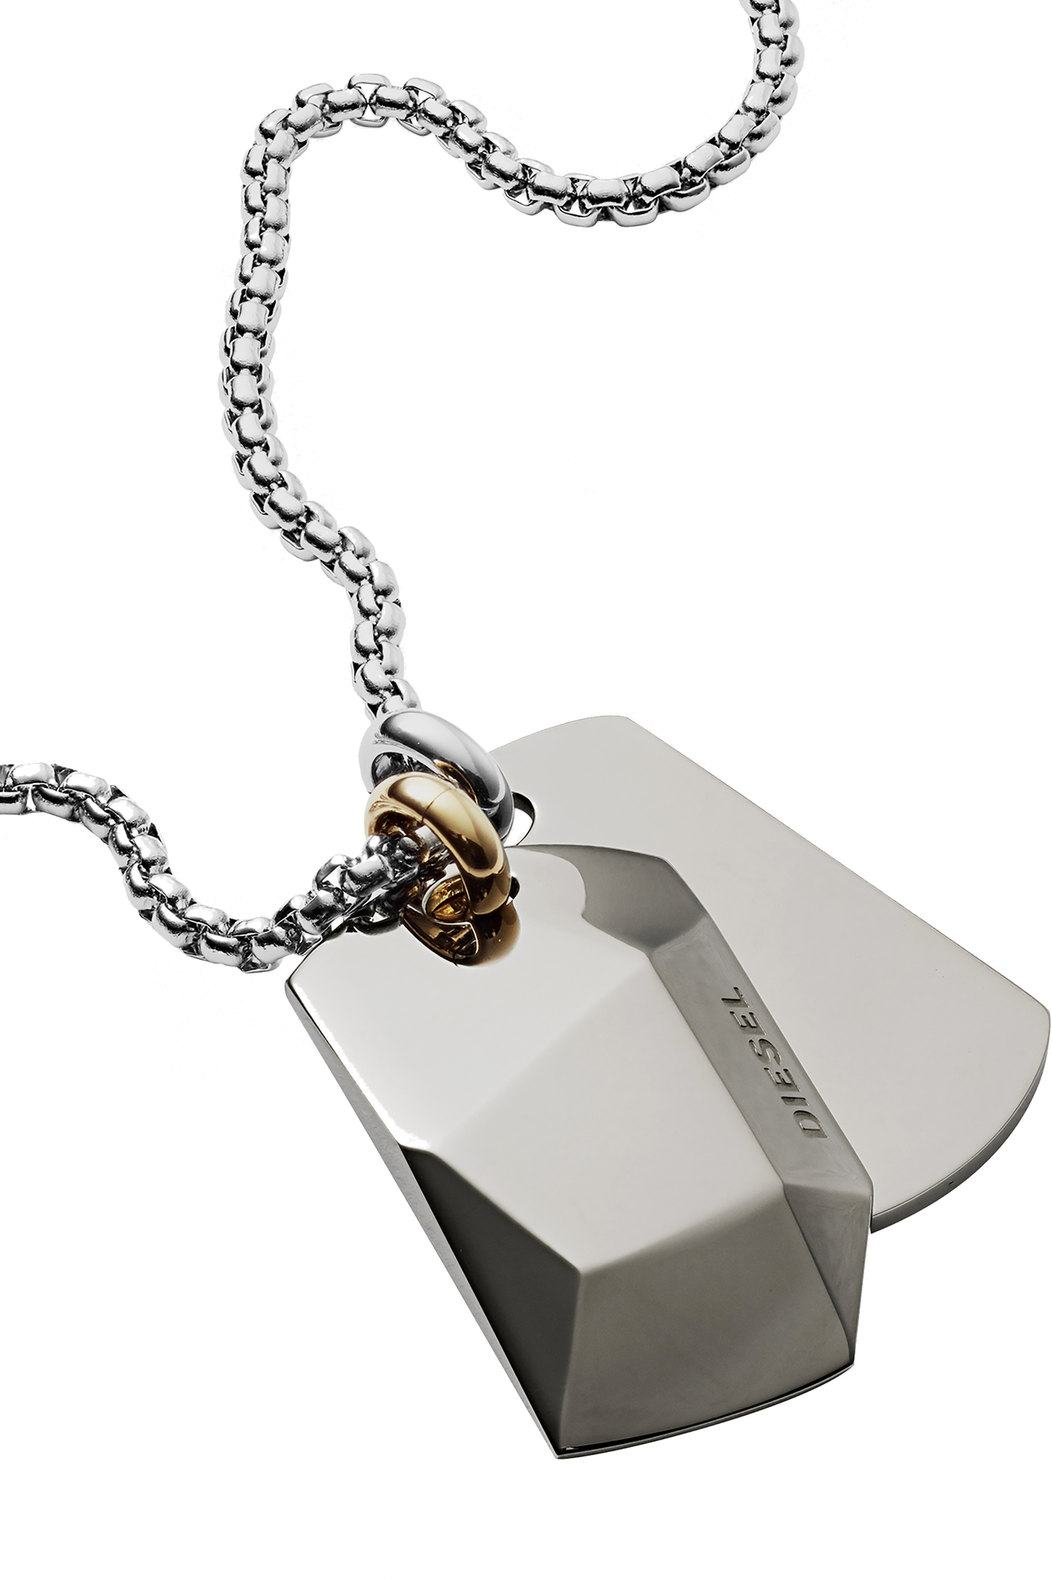 Stainless steel double dog tag necklace